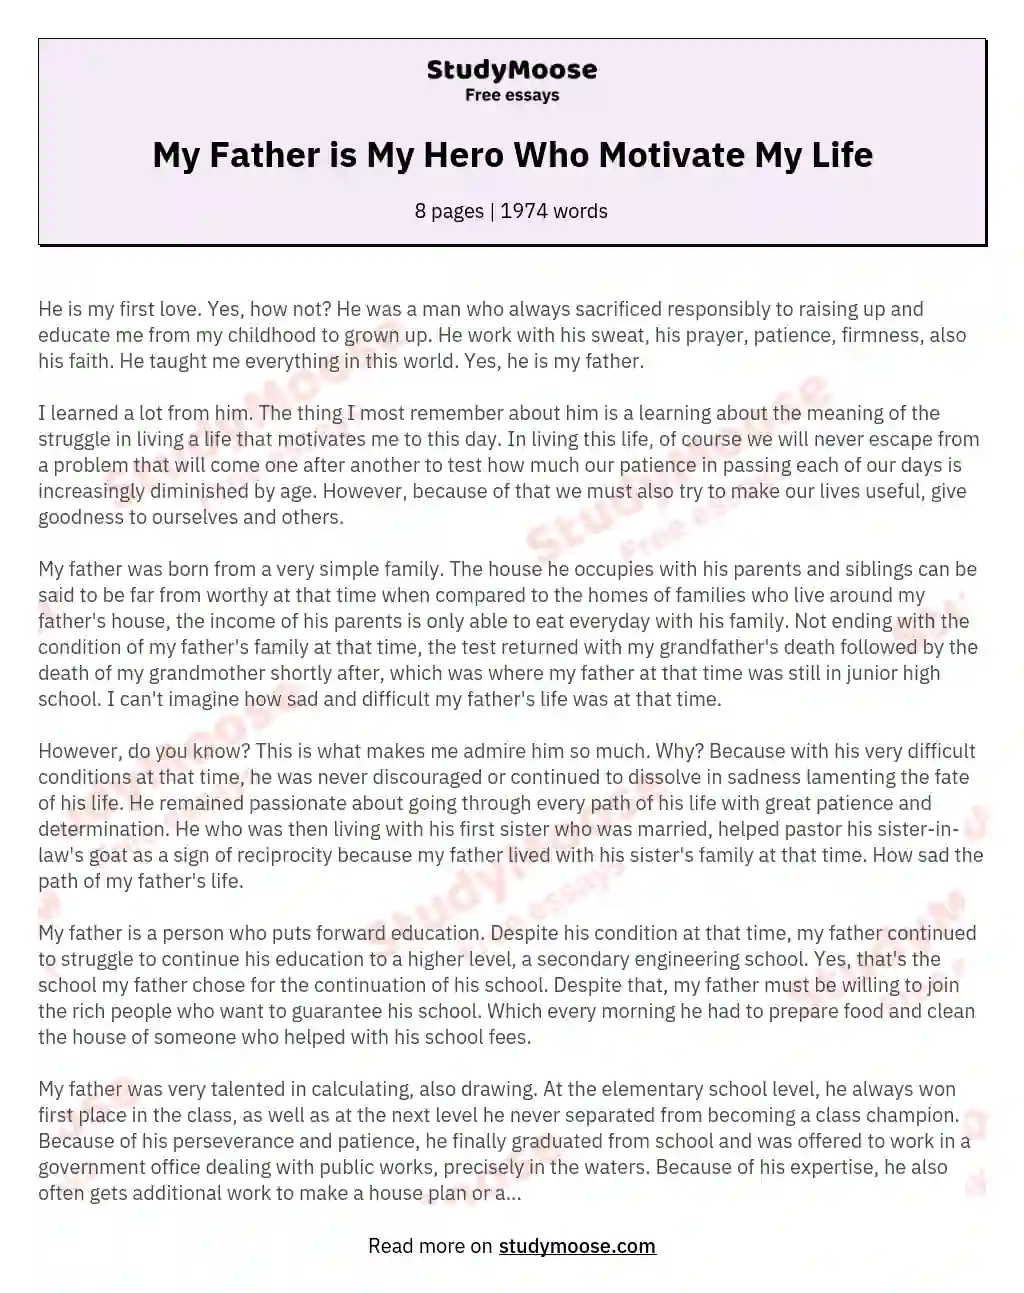 My Father is My Hero Who Motivate My Life essay